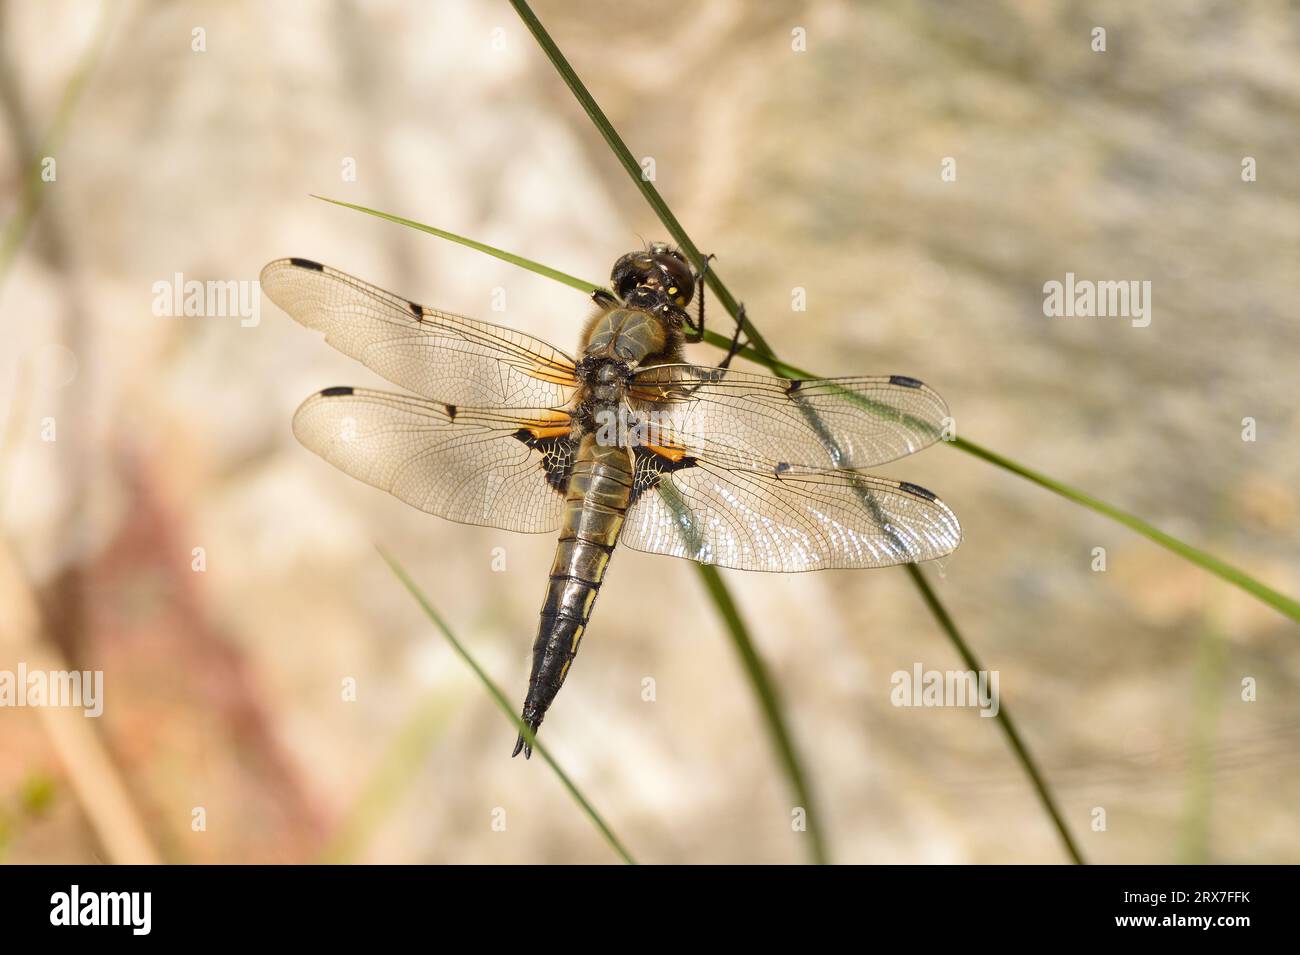 Four-spotted chaser dragonfly resting on some marsh grass during spring. Essex, England, UK. Stock Photo